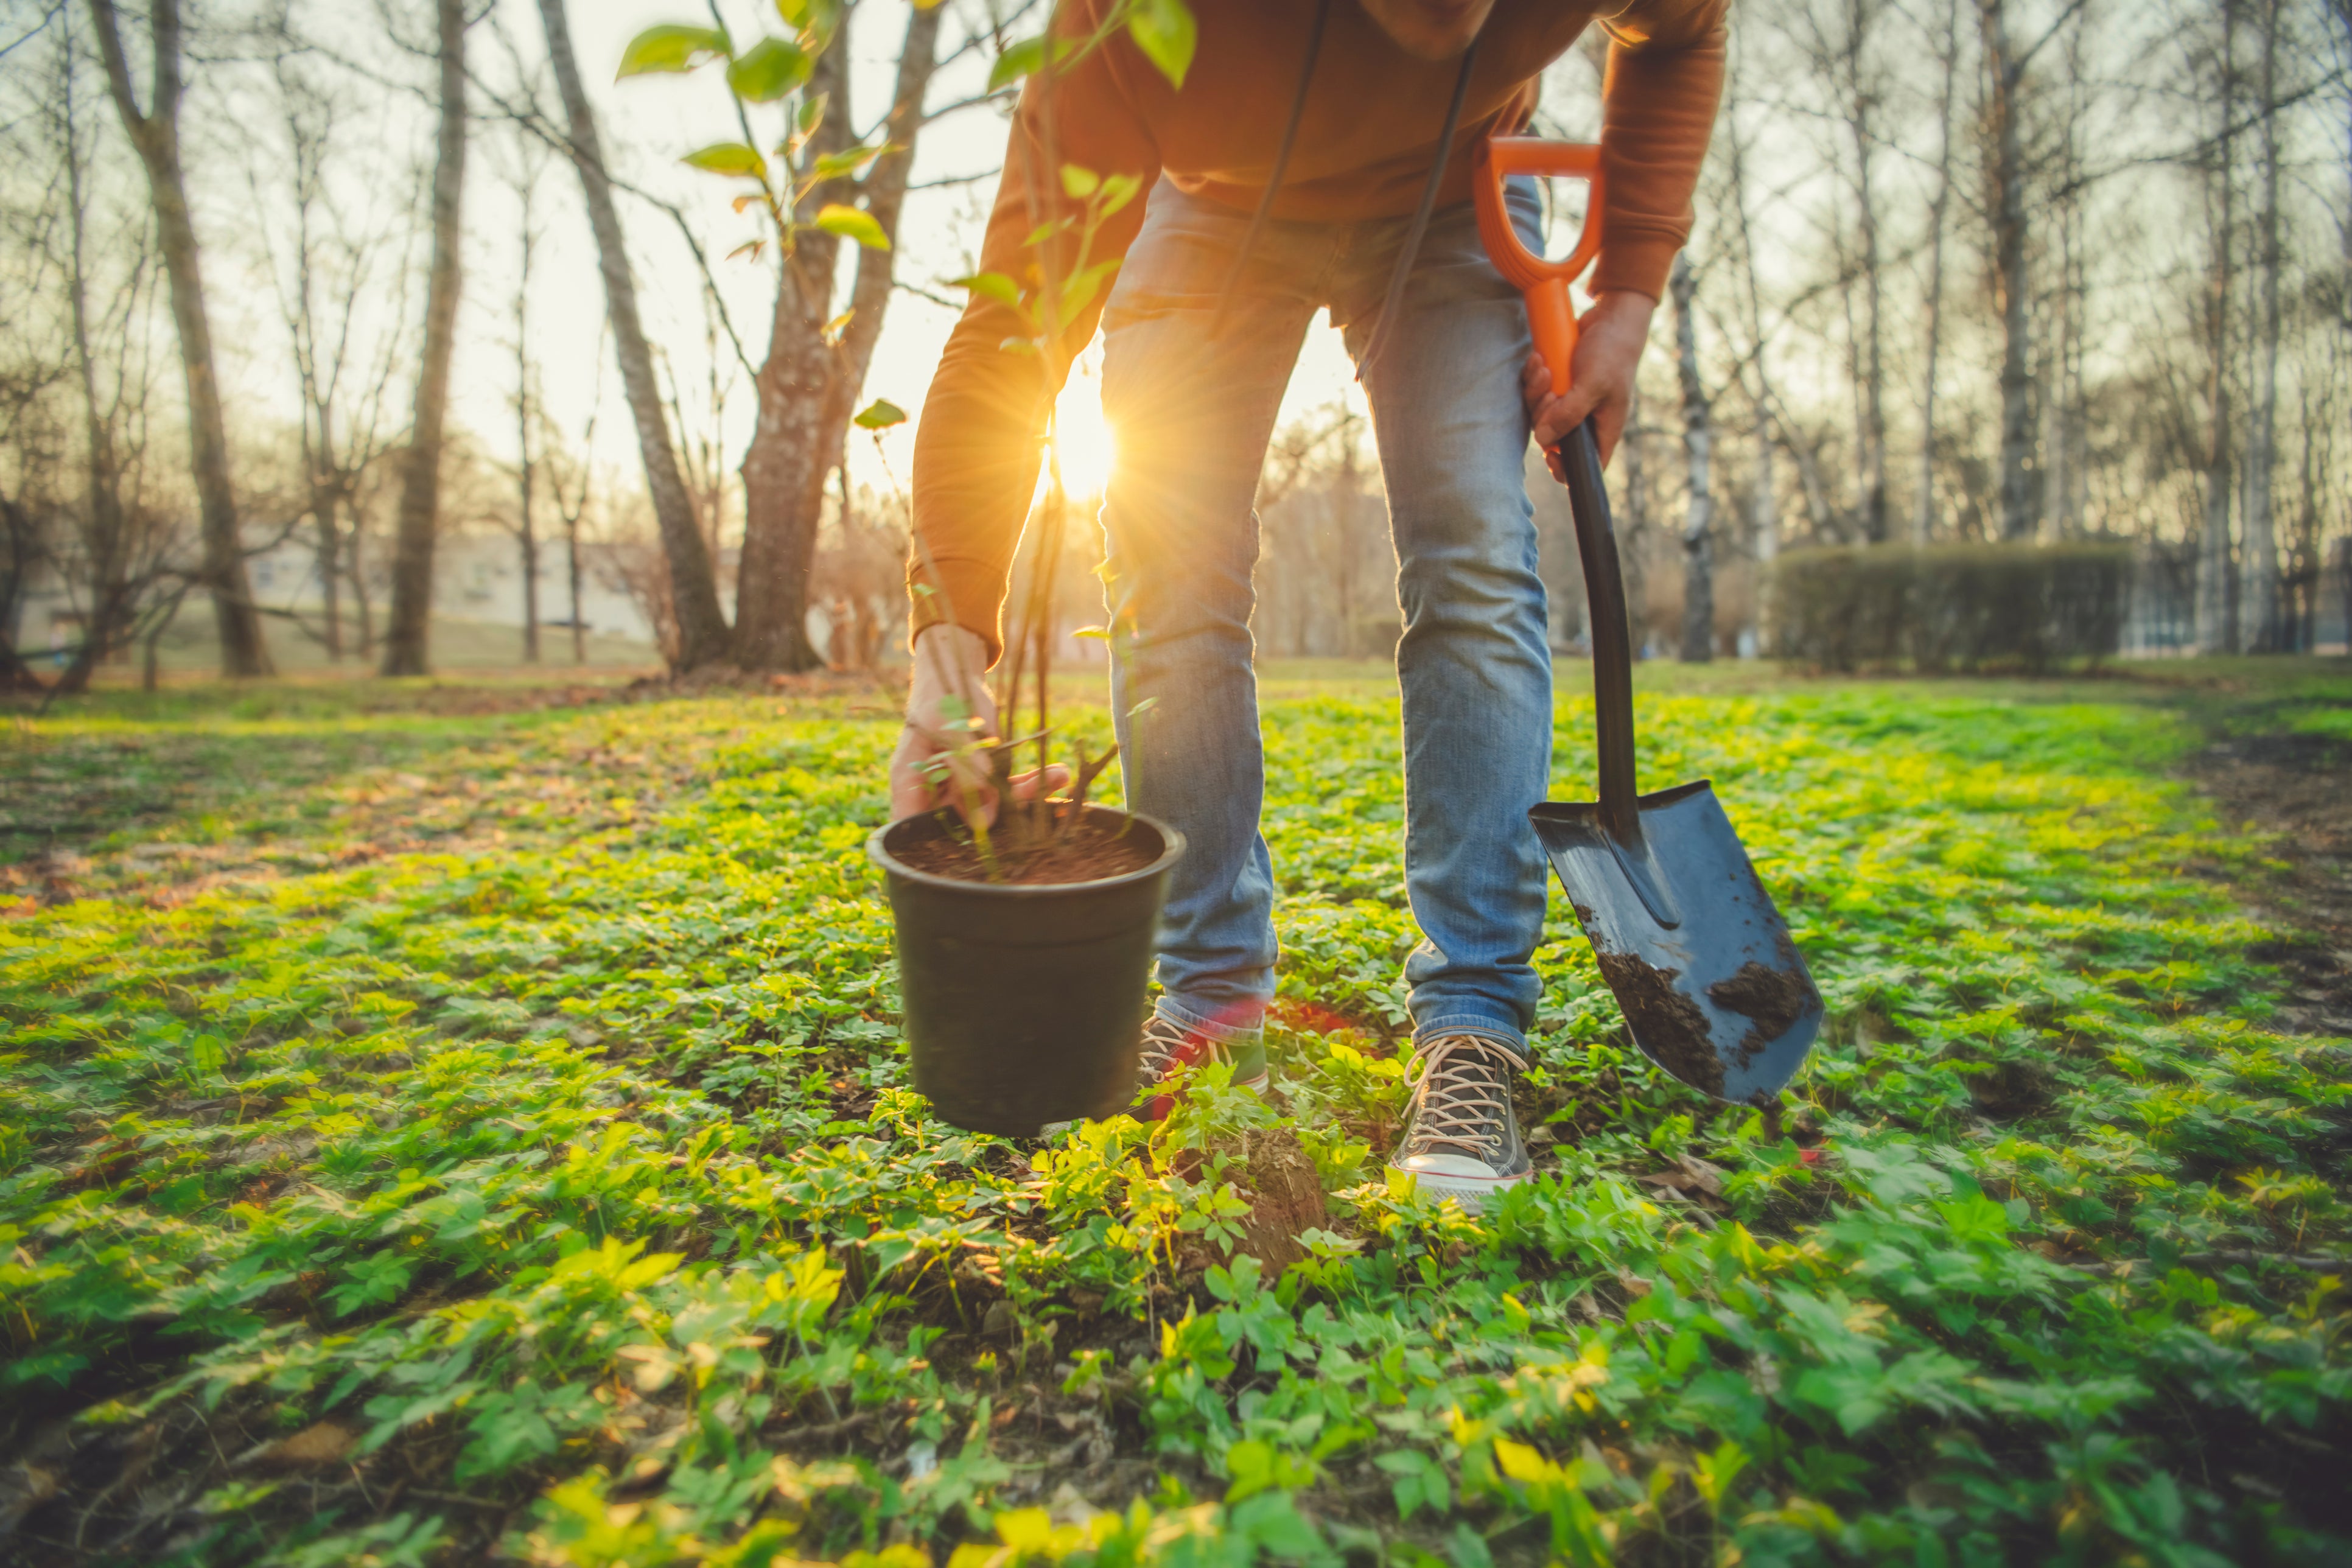 Tree planting will need to be increased across the UK if we are to hit our net zero target